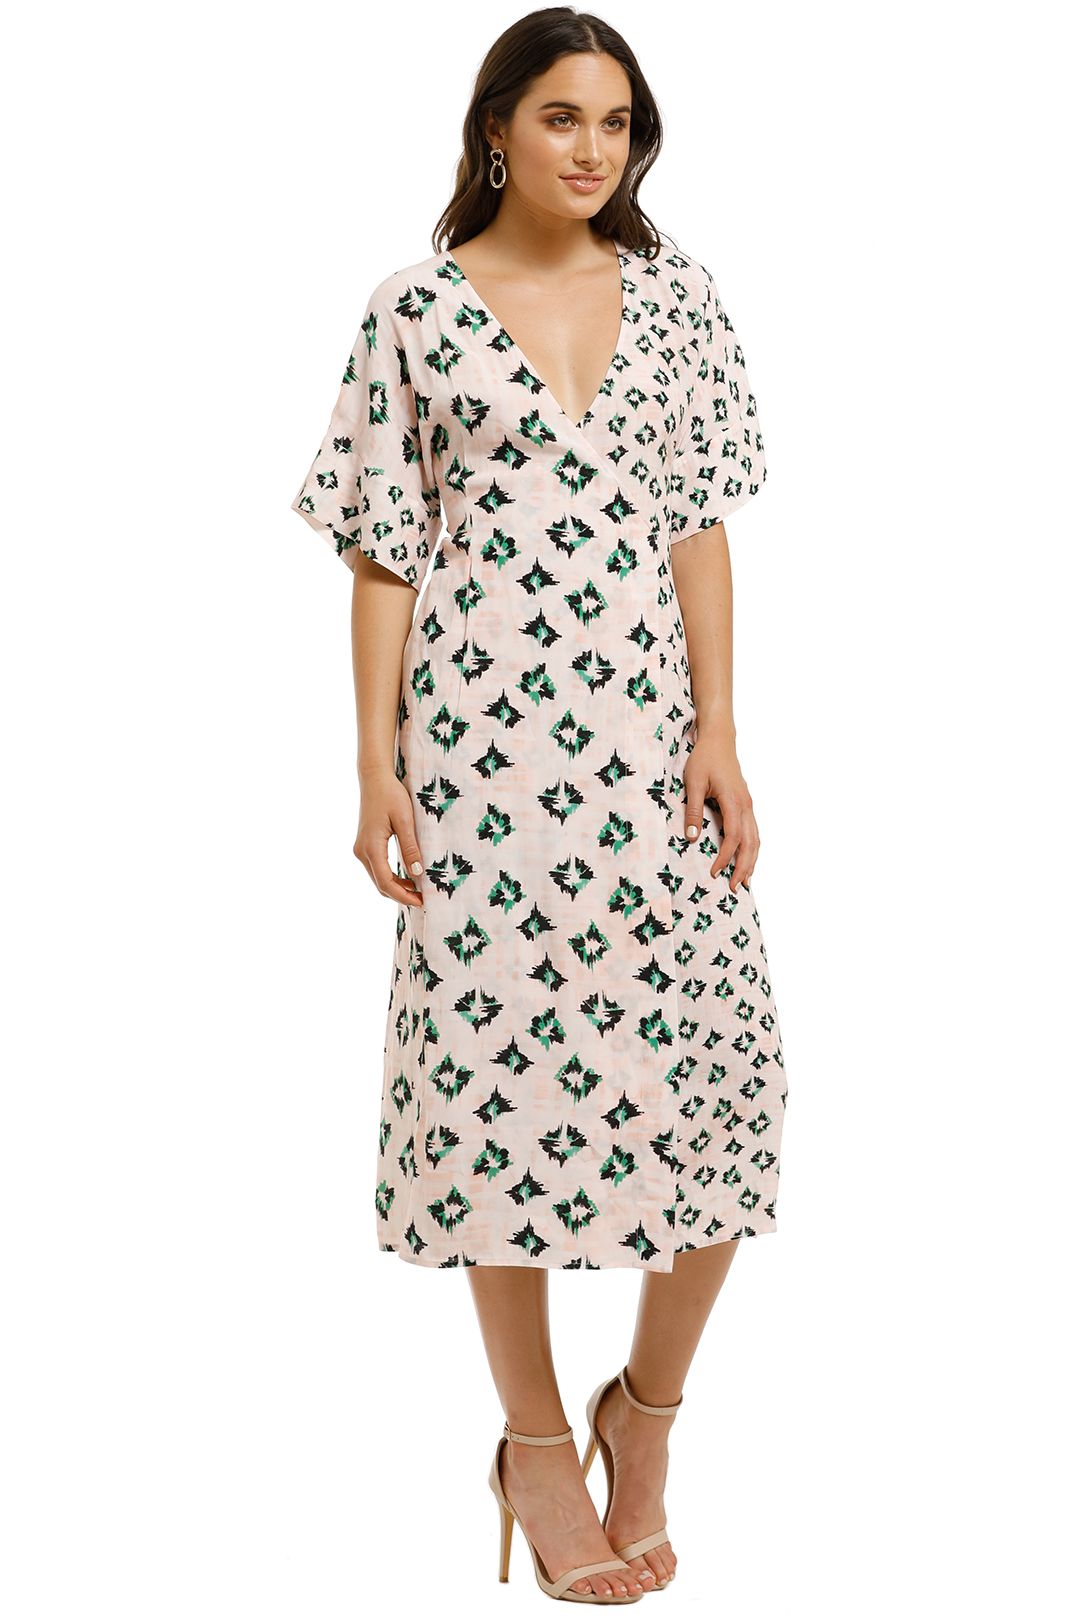 Suboo-On-The-Fly-Wrap-Dress-Pink-Green-Side